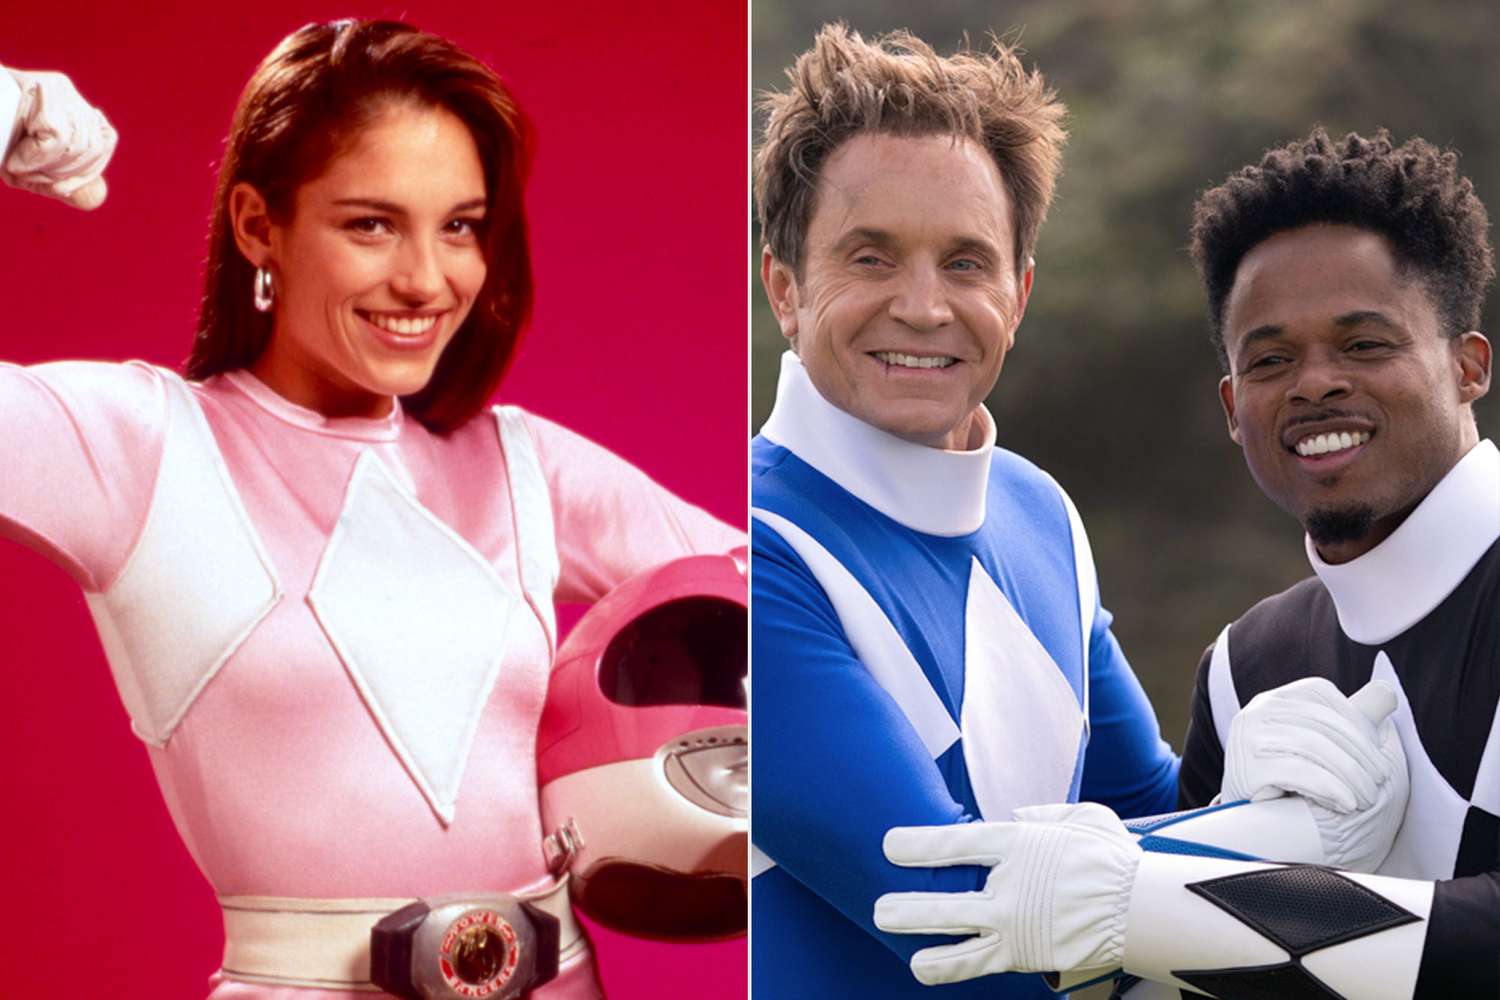 desmo artis share pictures of the pink power ranger photos